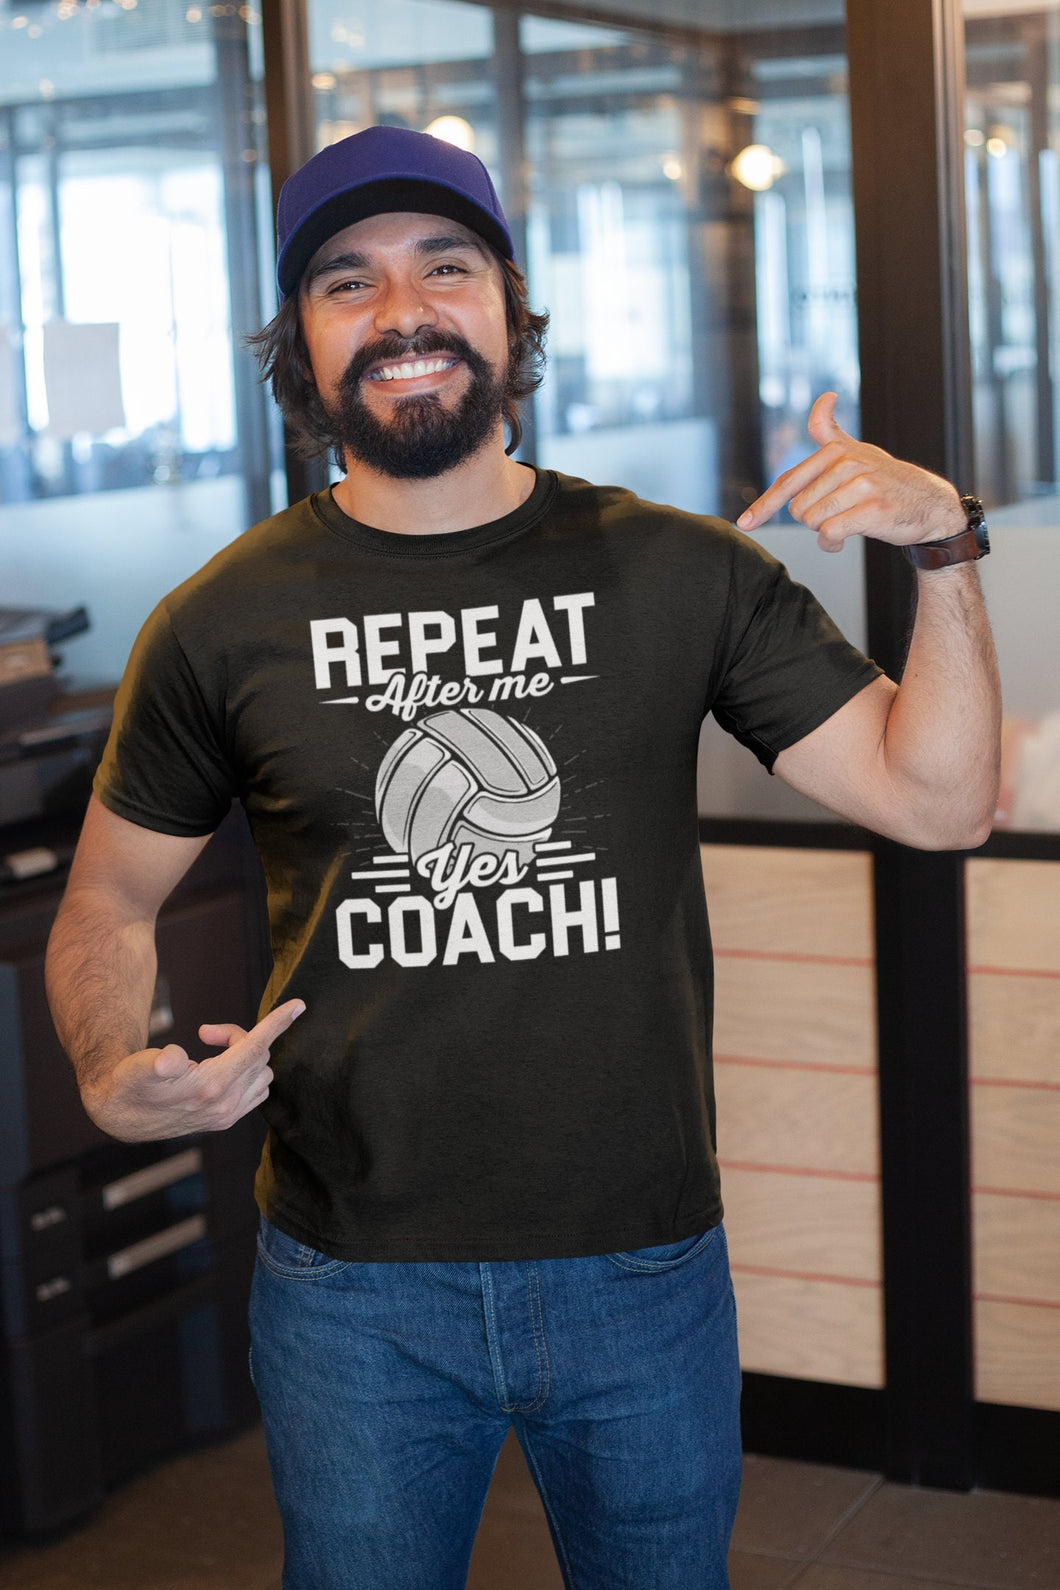 Repeat After Me Yes Coach Shirt, Volleyball Shirt, Volleyball Player, Volleyball Coach Shirt